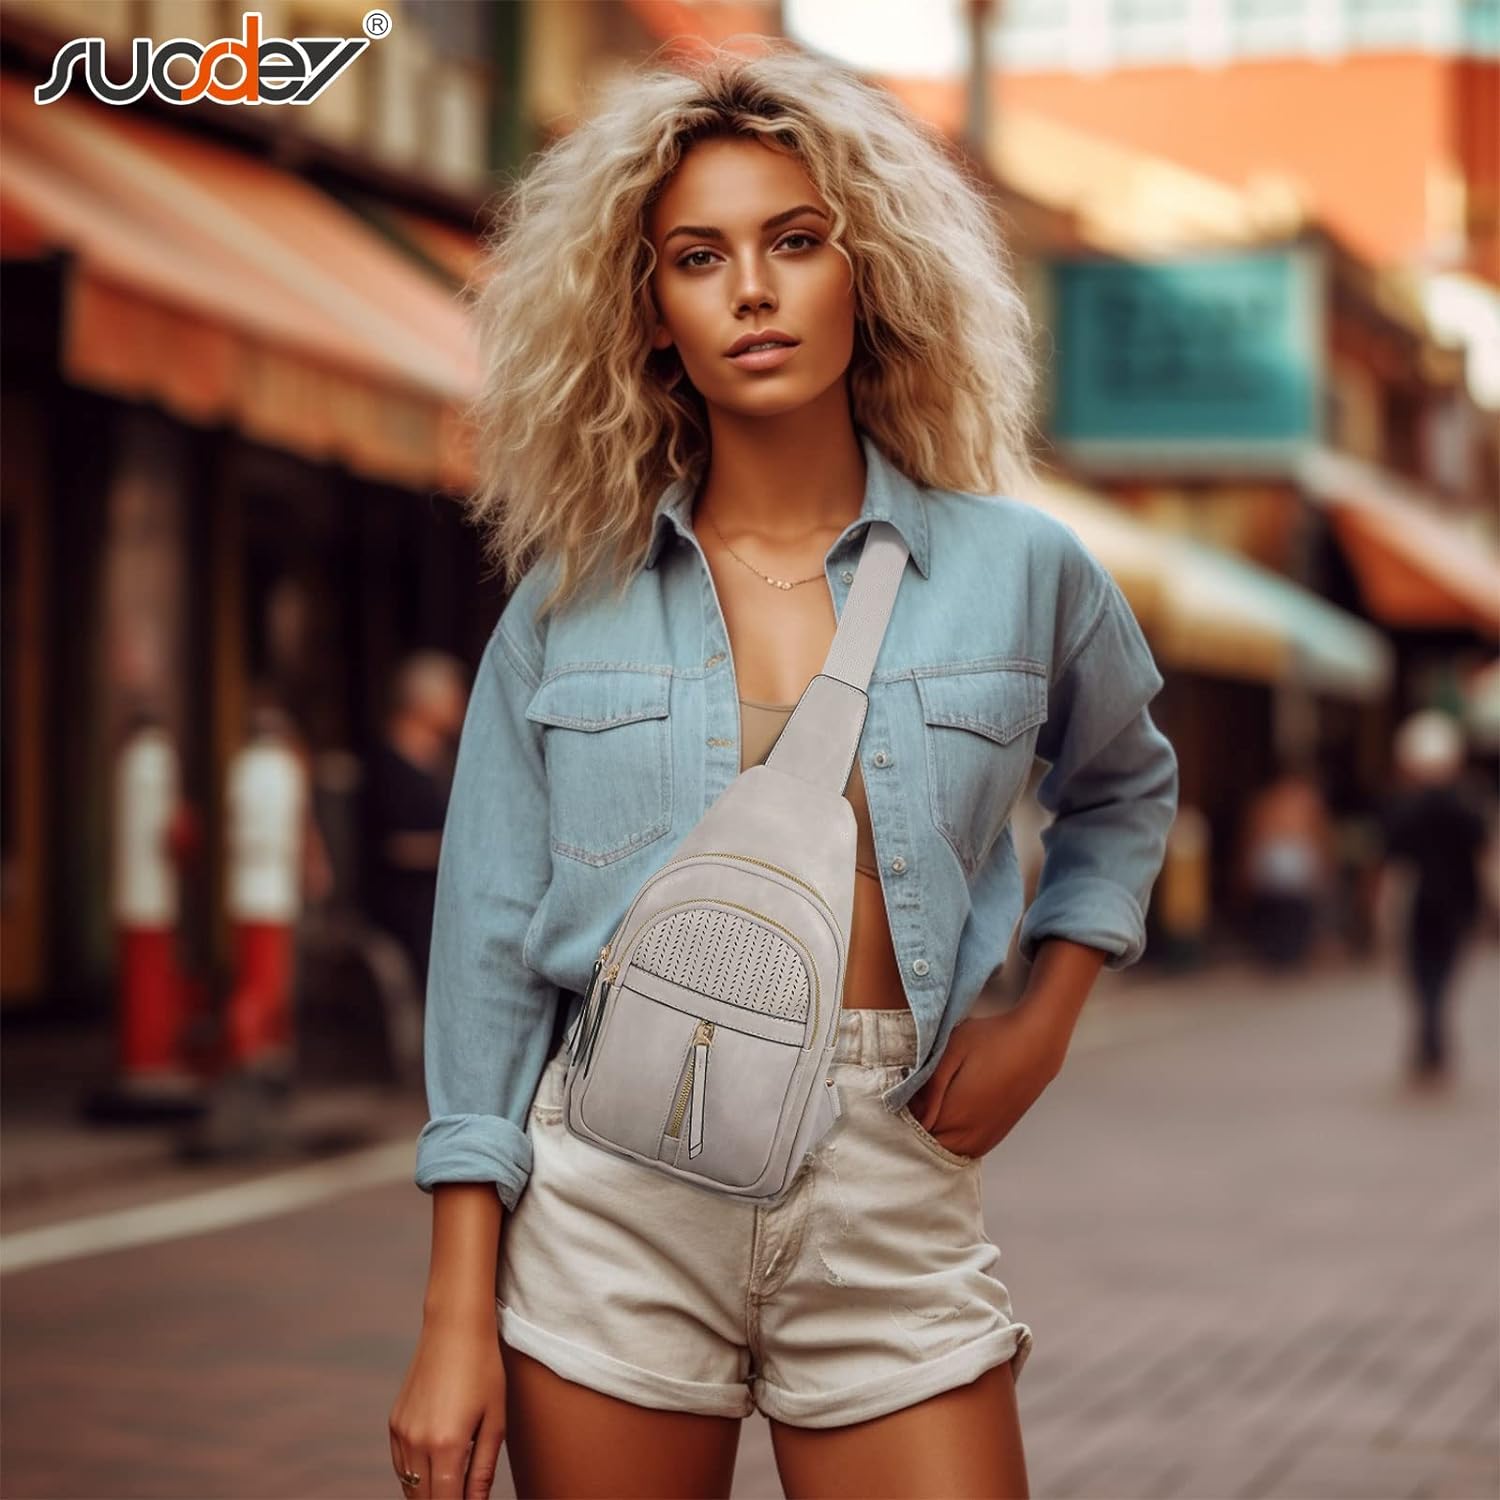 SOUSDEY 2023 Sling Bag for Women Leather Fashion Fanny Waist Pack Crossbody Bags for Women Trendy Chest Bag with Adjustable Strap Traveling Walking, Gifts for Women Teen Girls White Gray, White Gray, Fashion Fanny Pack Crossbody Bags